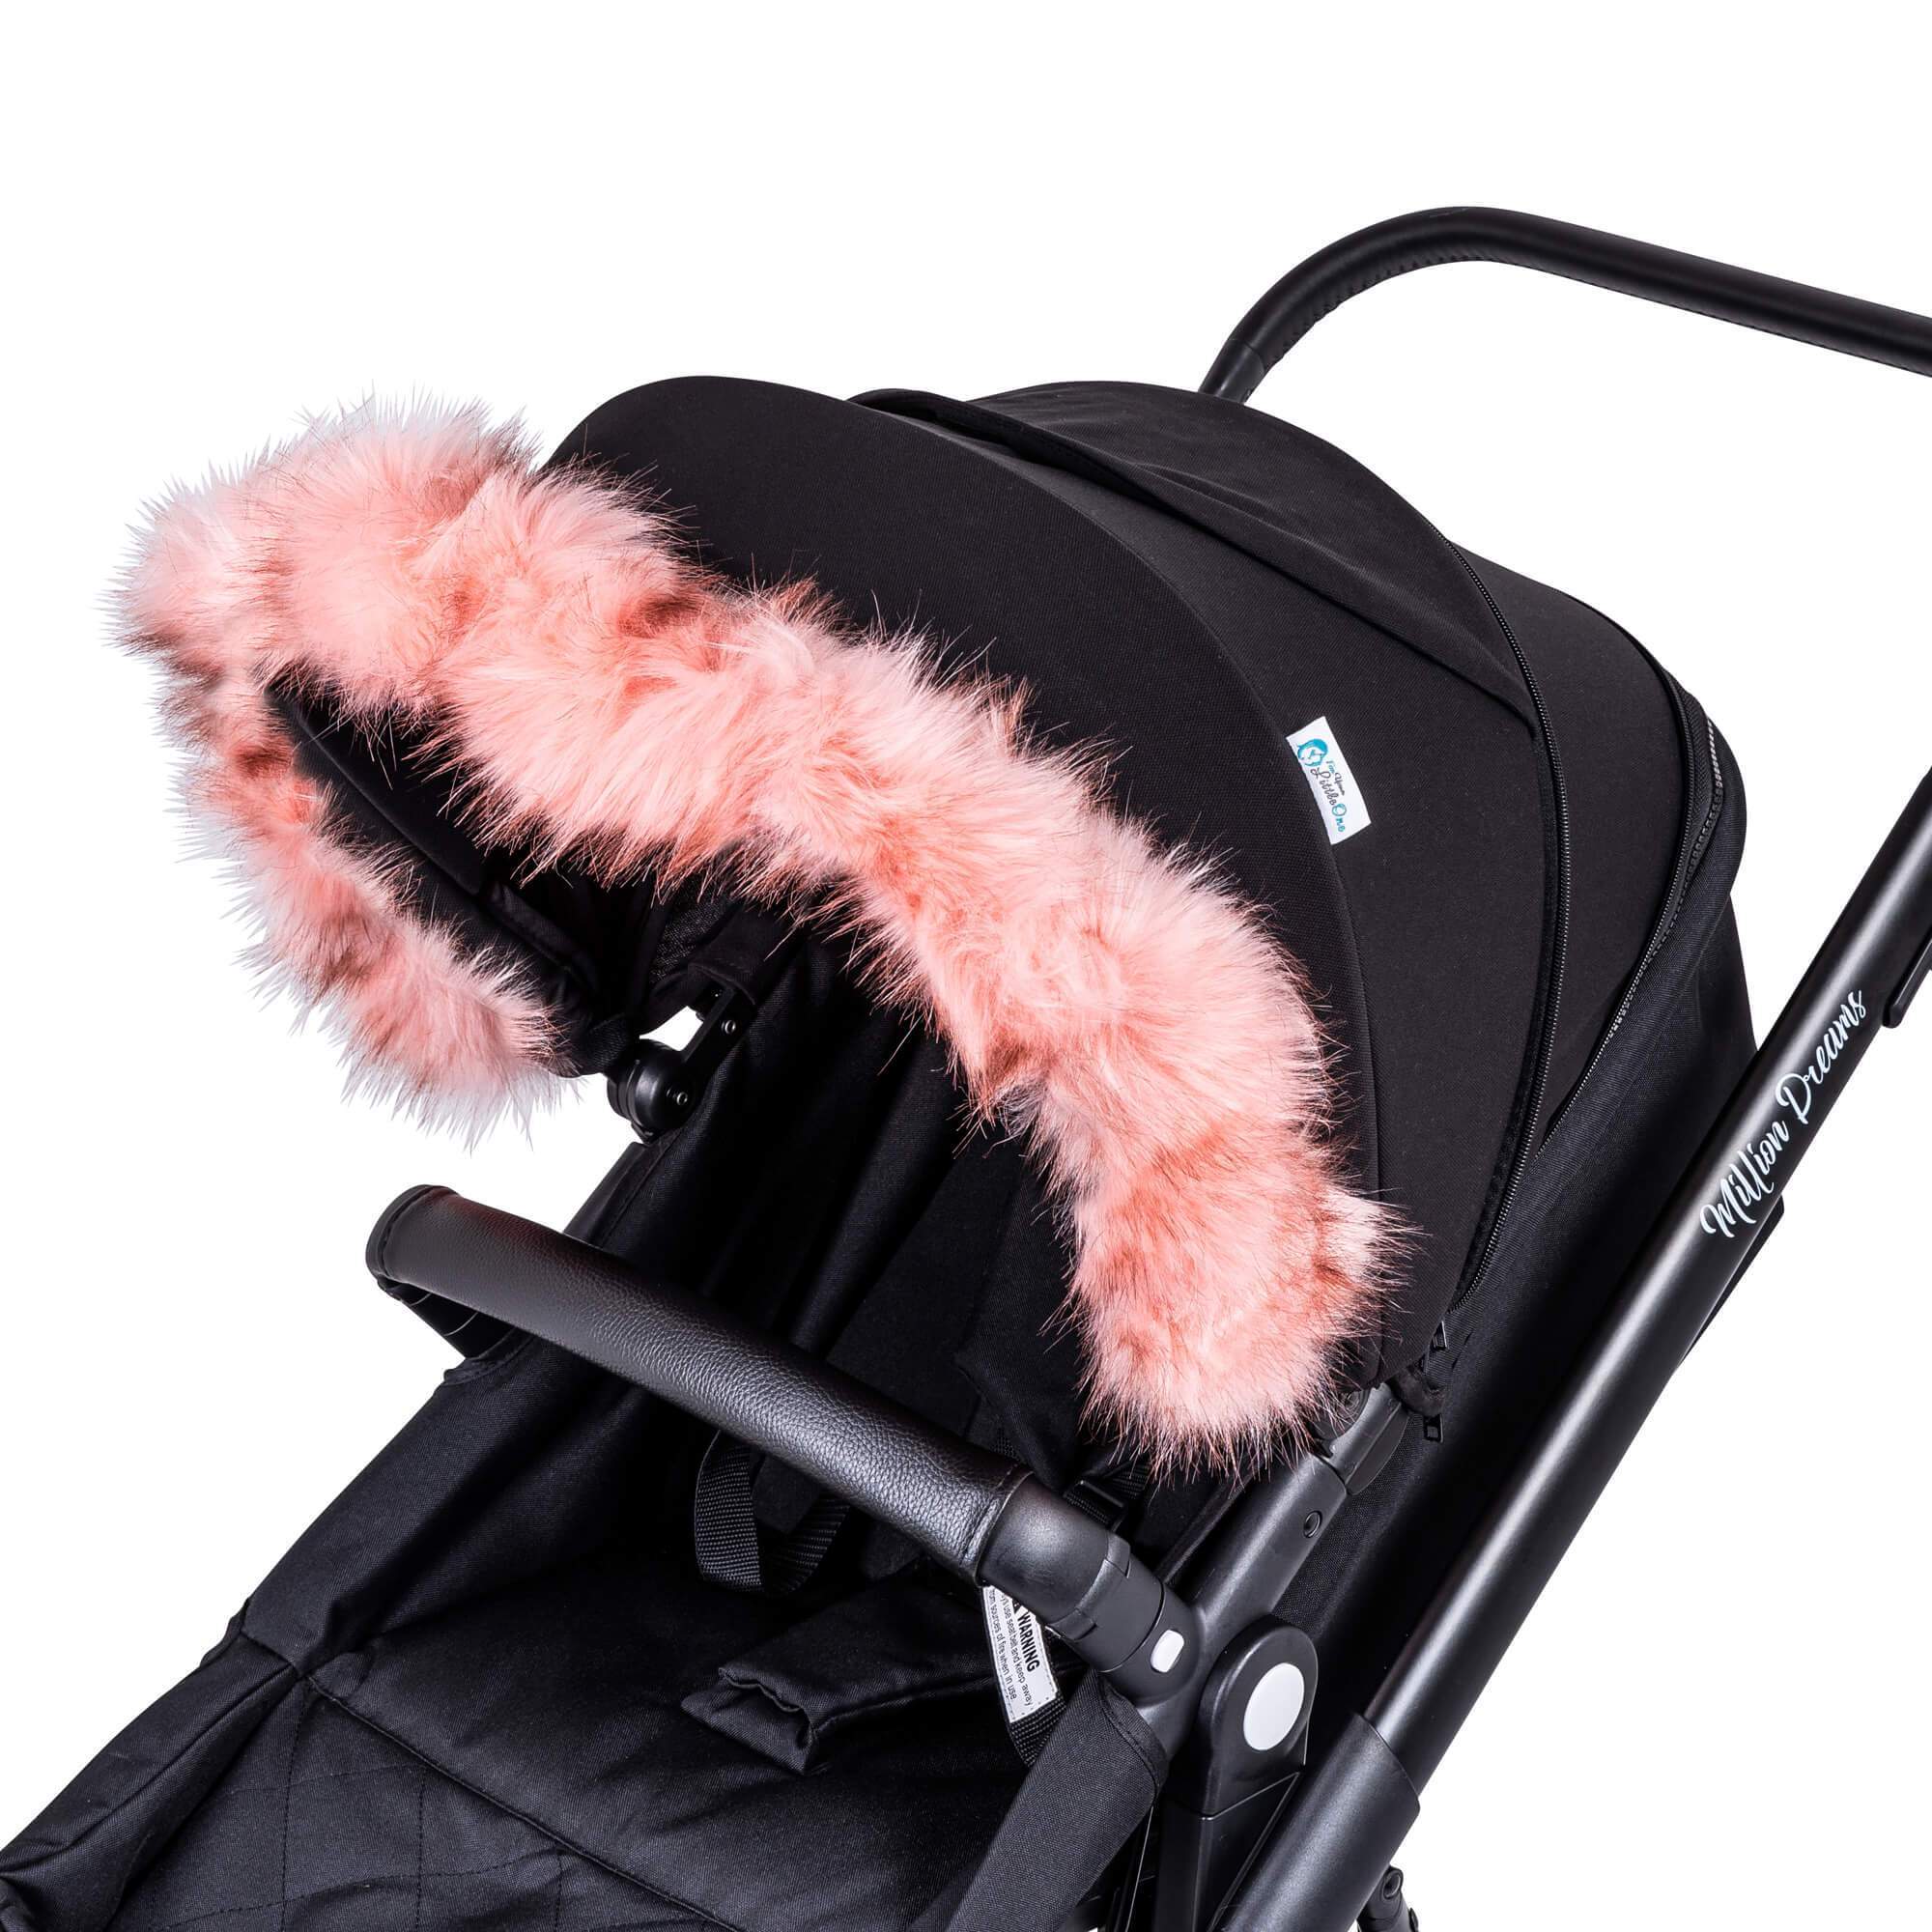 Pram Fur Hood Trim Attachment for Pushchair Compatible with Seed - For Your Little One